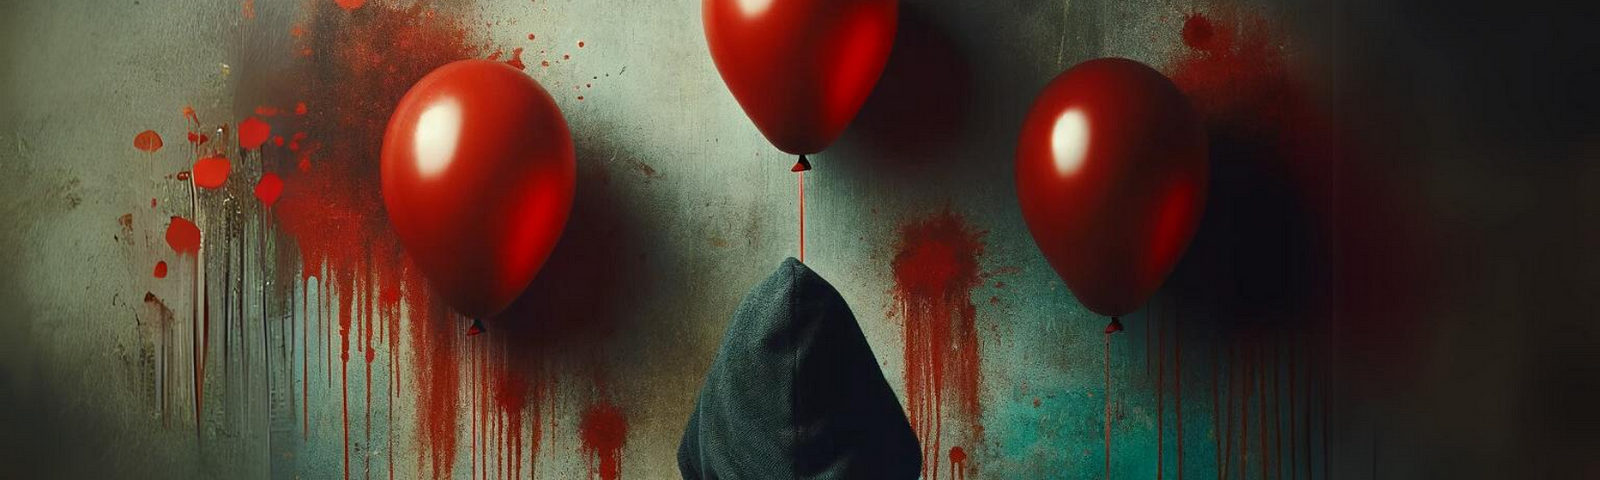 A figure in a hooded jacket stands with three red balloons against a backdrop of gray, with streaks of red suggesting both innocence lost and stark resilience.